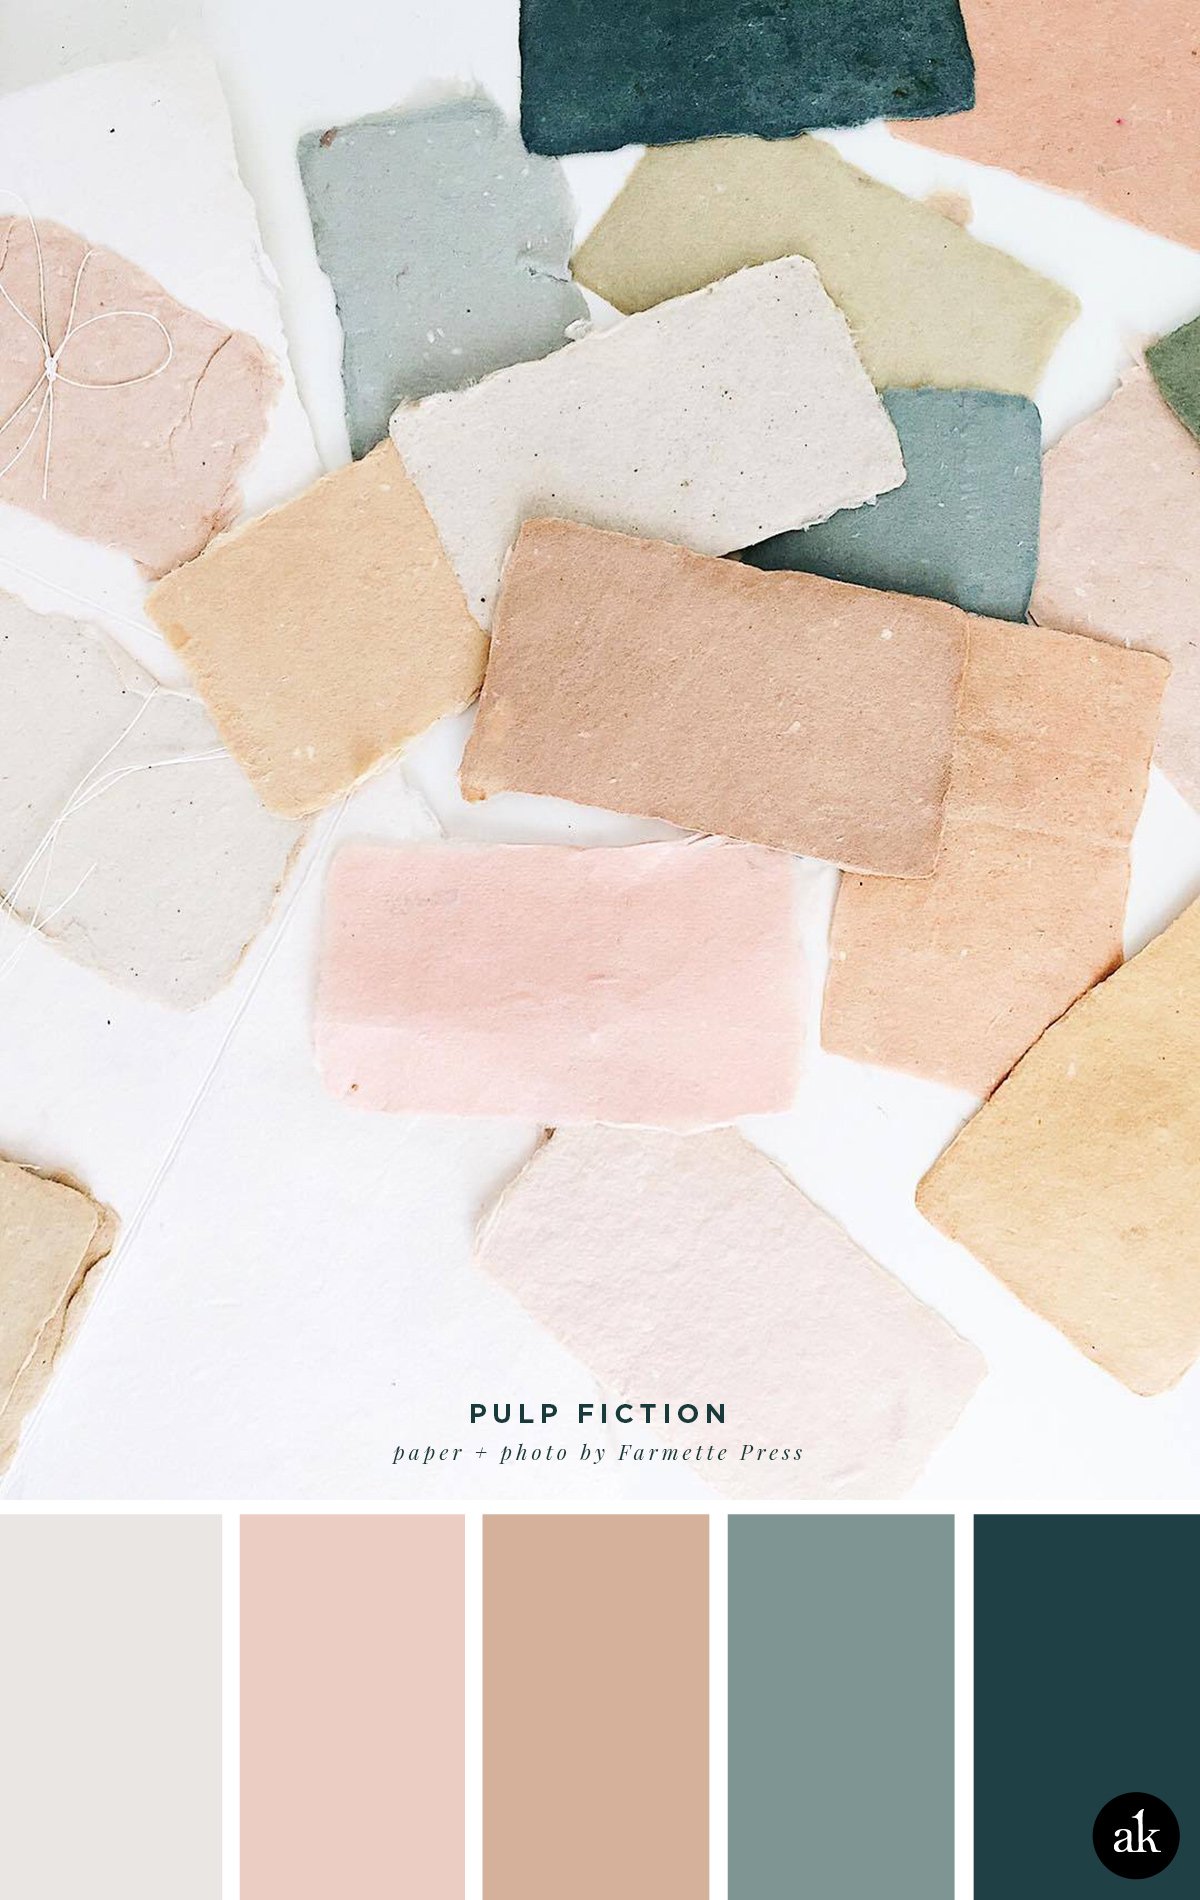 a pastel-paint-inspired color palette — Akula Kreative